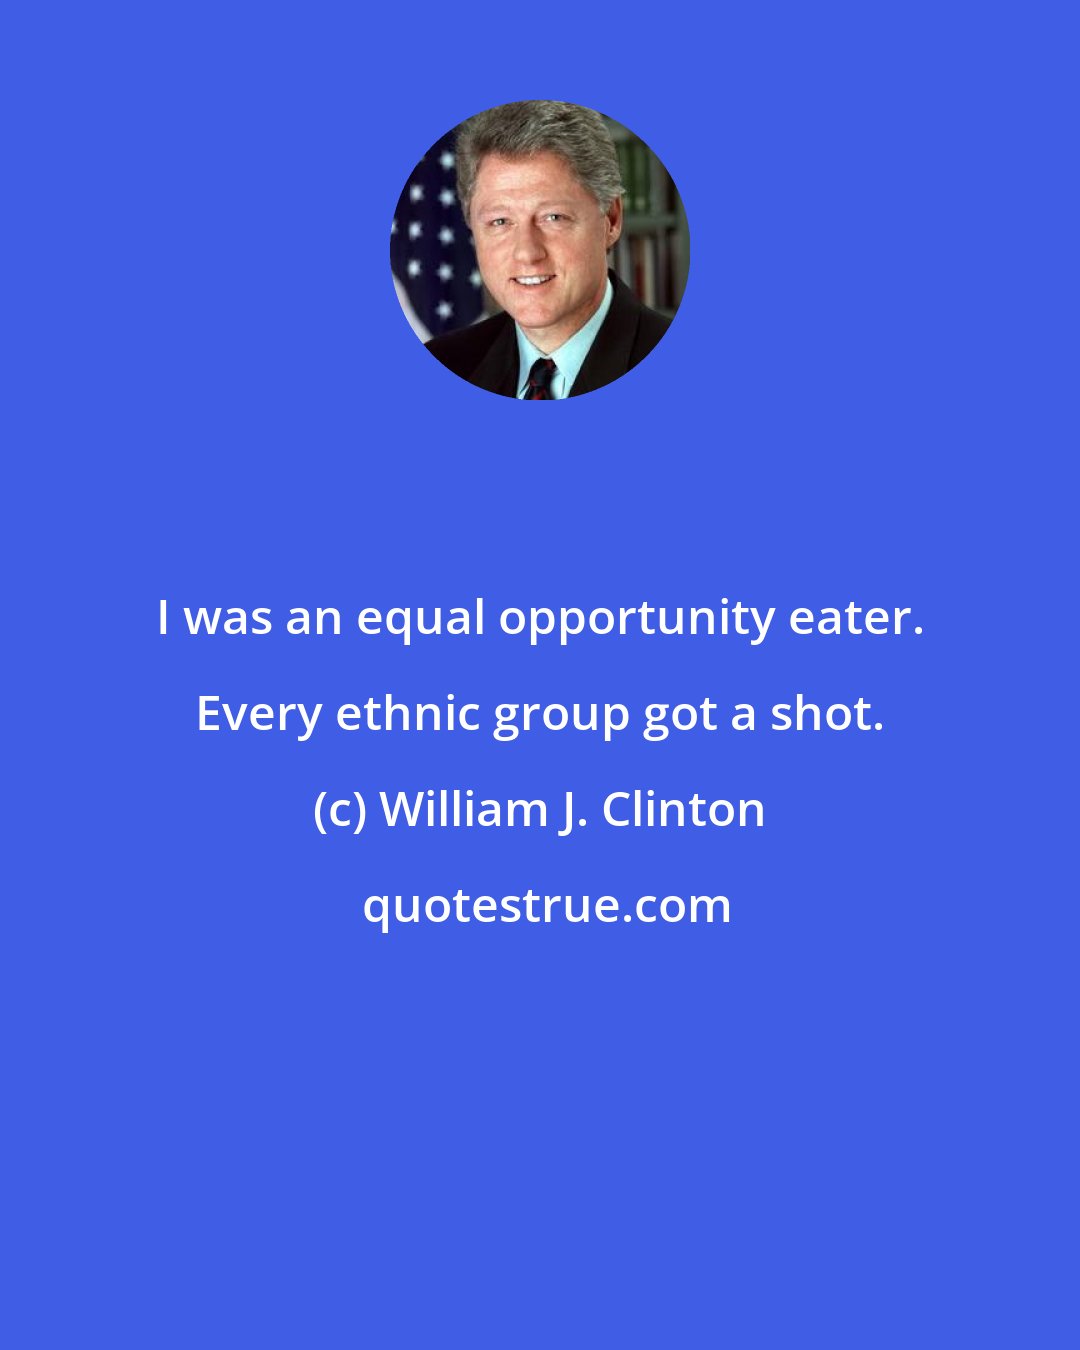 William J. Clinton: I was an equal opportunity eater. Every ethnic group got a shot.